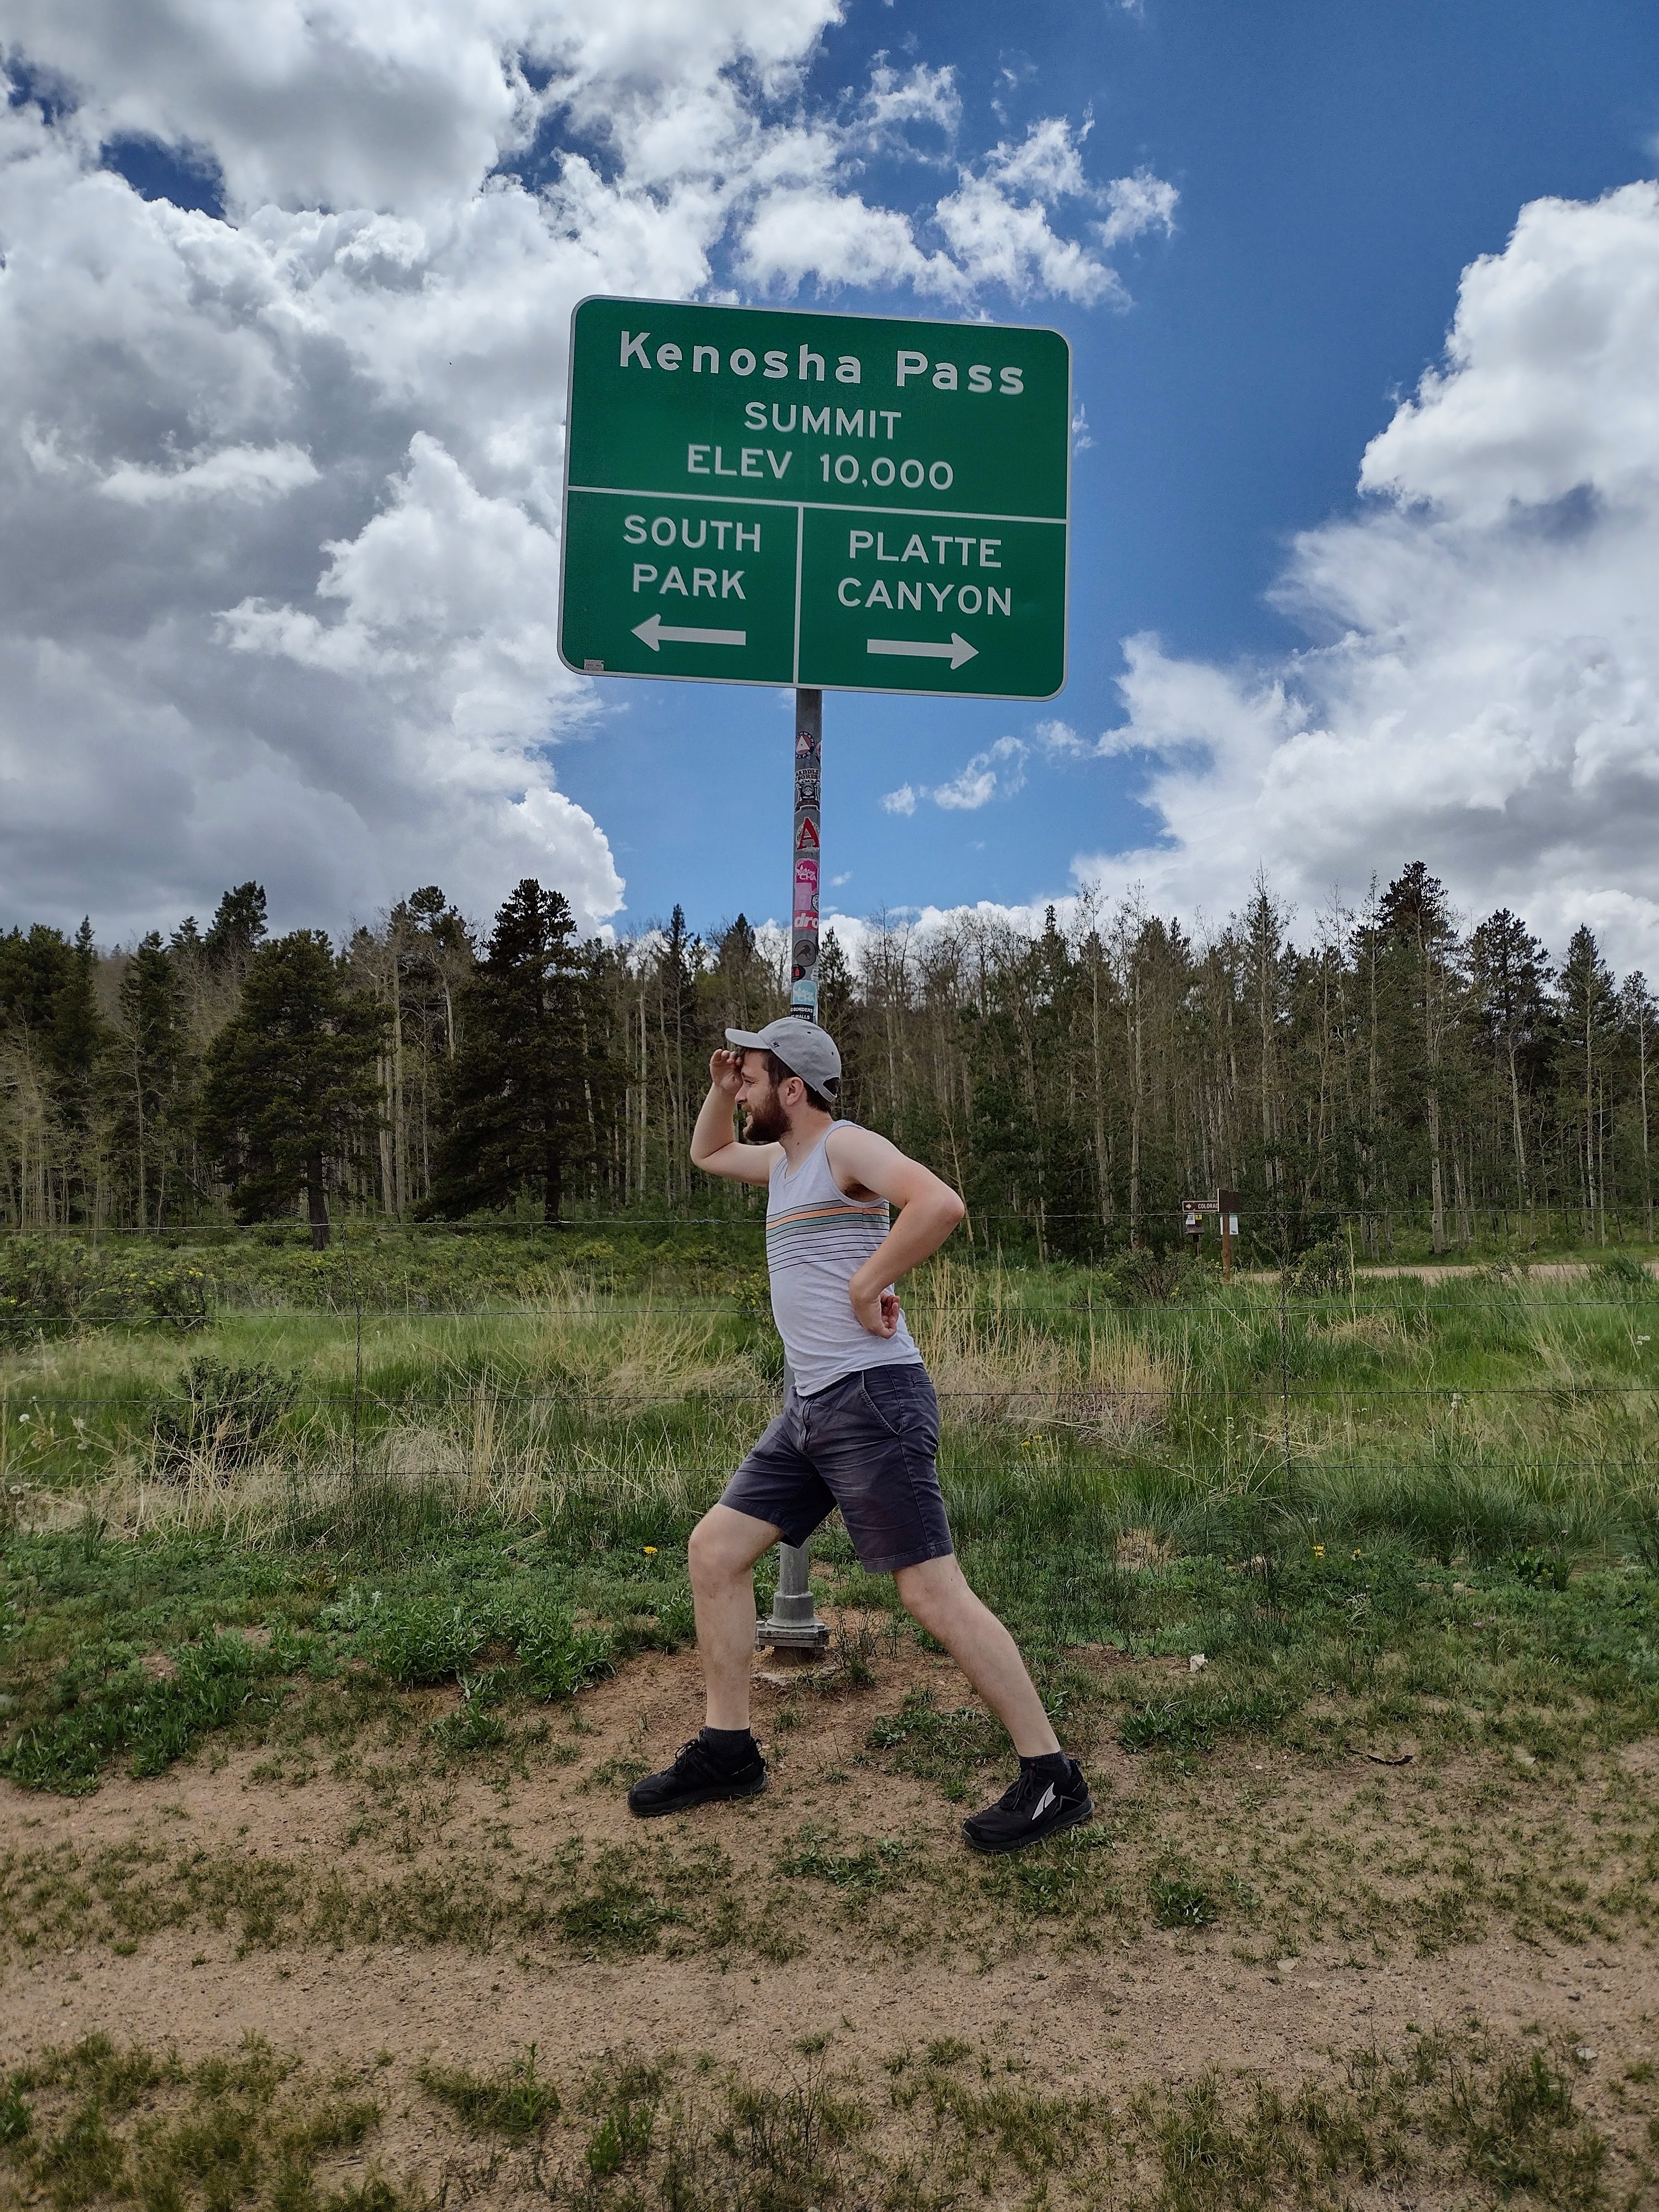 I stand in front of the sign for Kenosha Pass, elevation 10,000 ft, looking westward in a comical pose toward South Park, Colorado